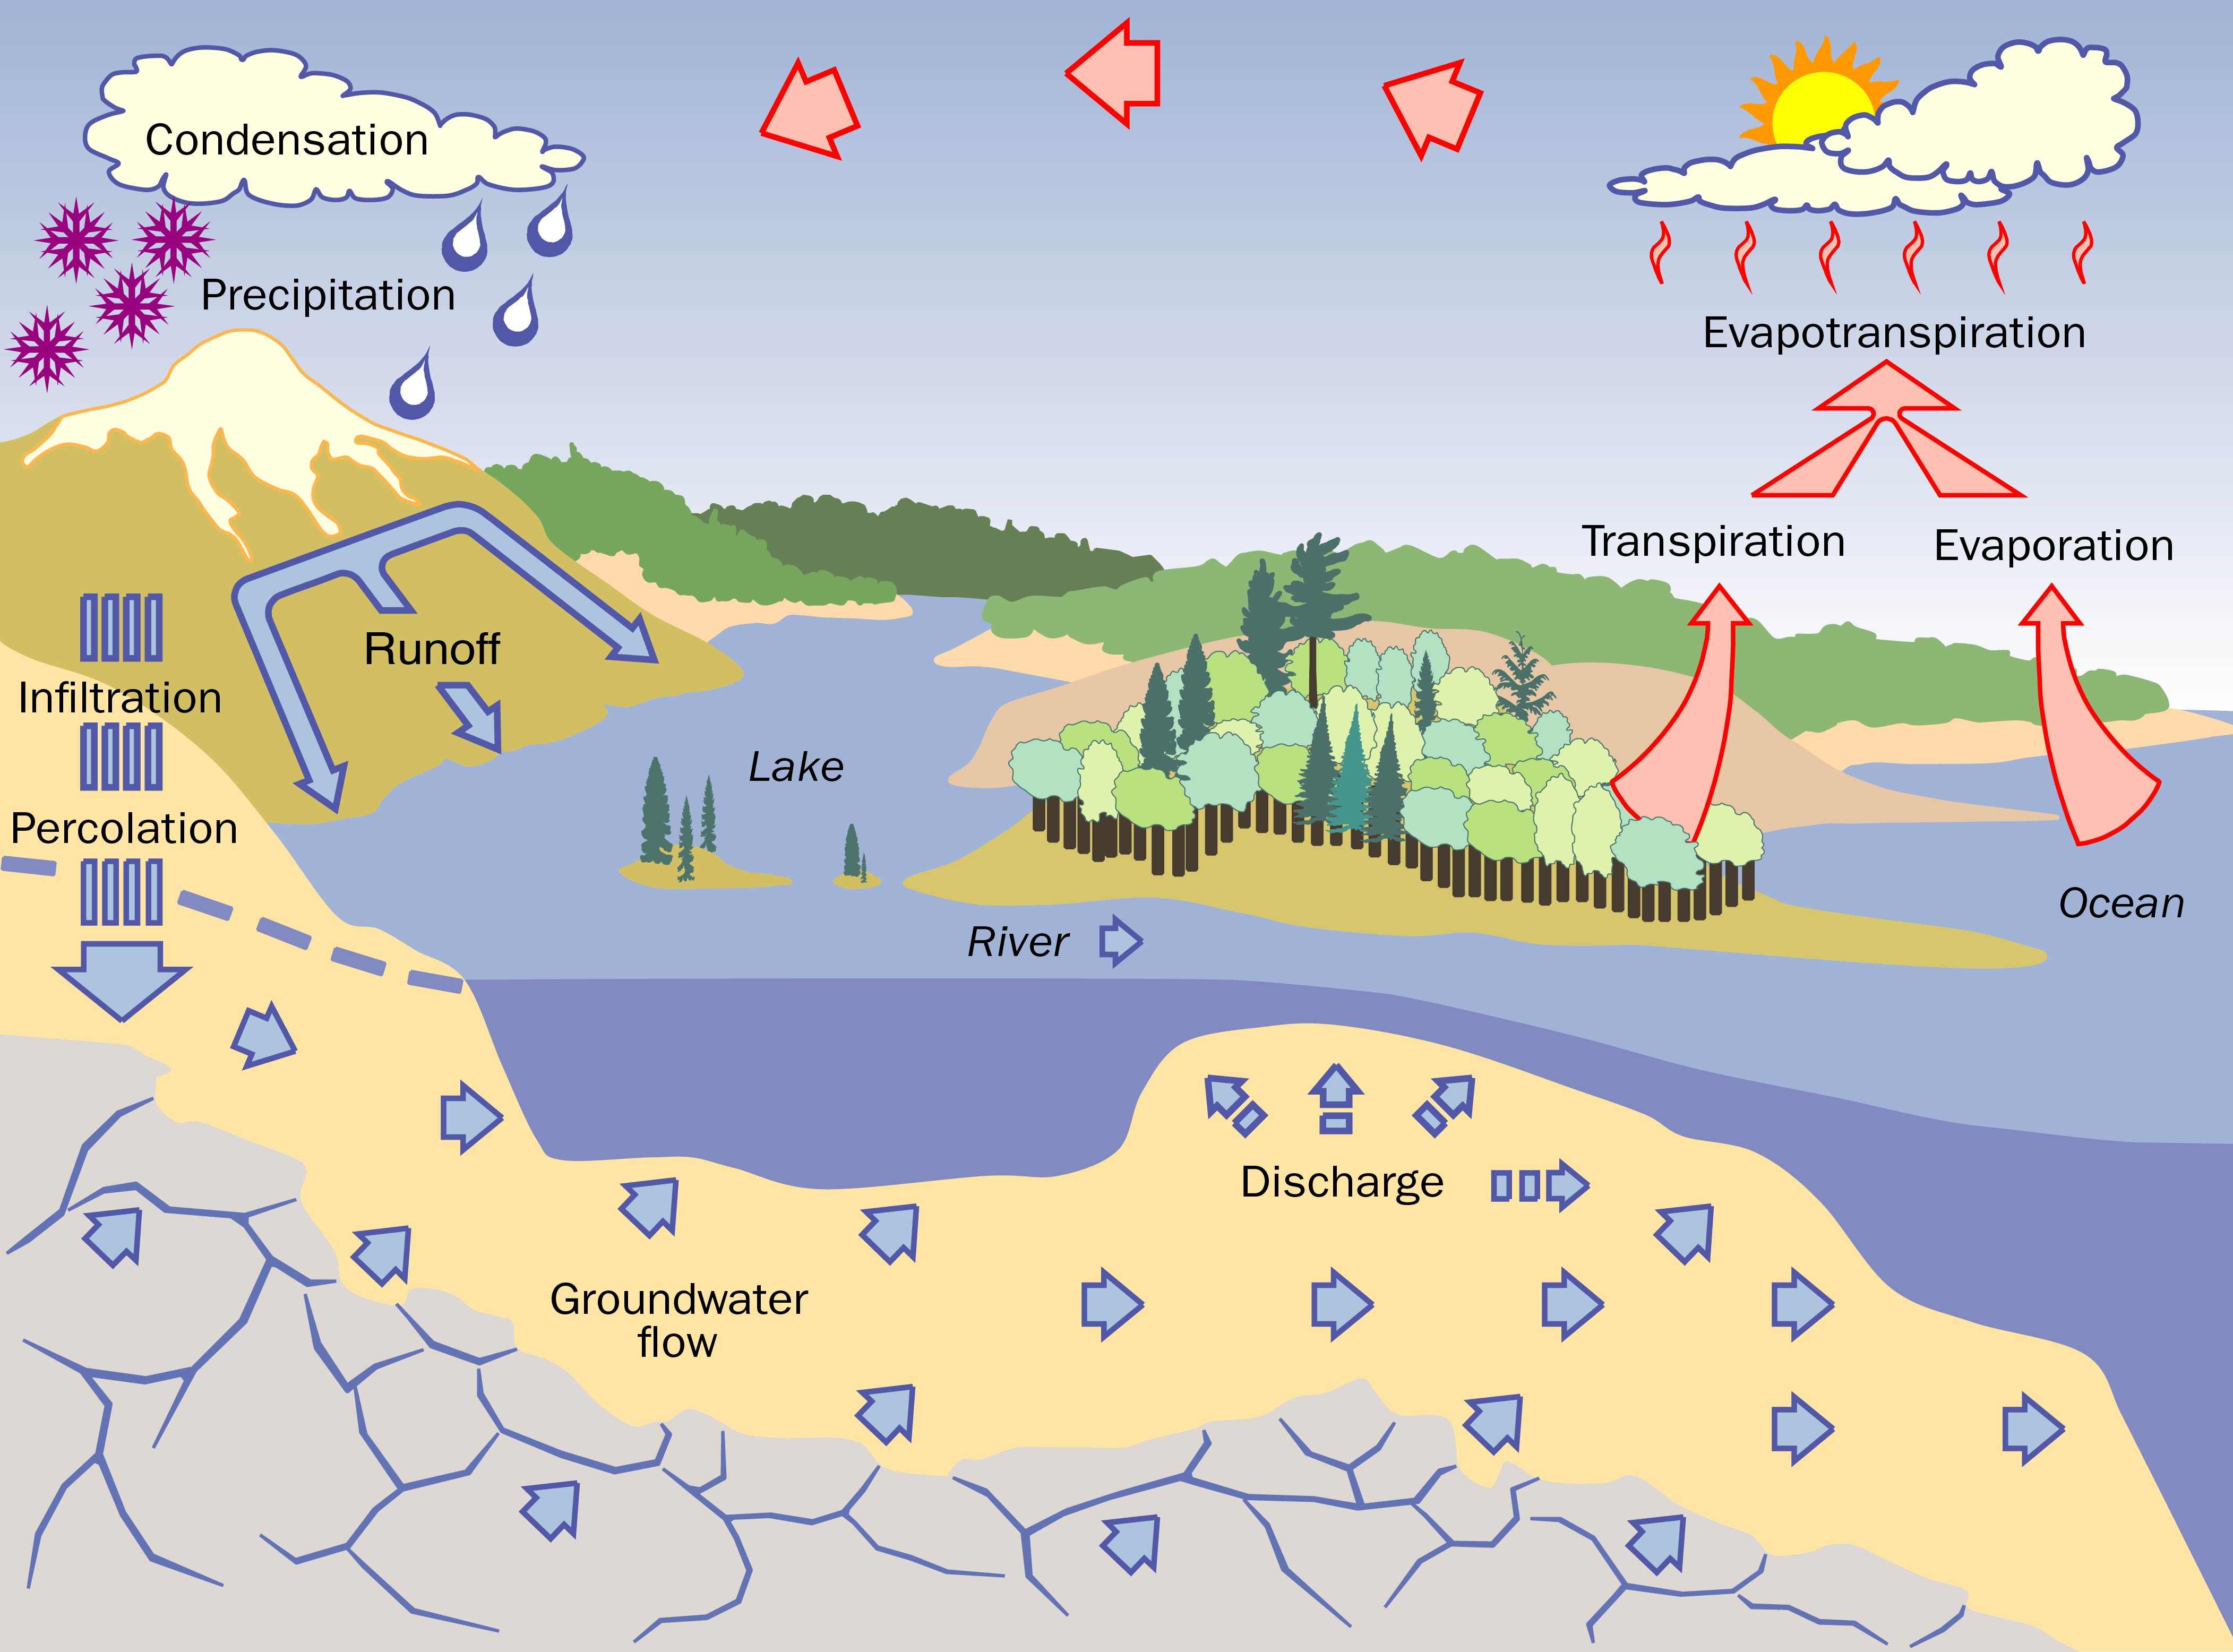 Illustrates how water cycles form precipitation in the mountains, which forms runoff into the oceans, lakes and rivers. This runoff also recharges the groundwater. Water evaporates from the water bodies back into the air.